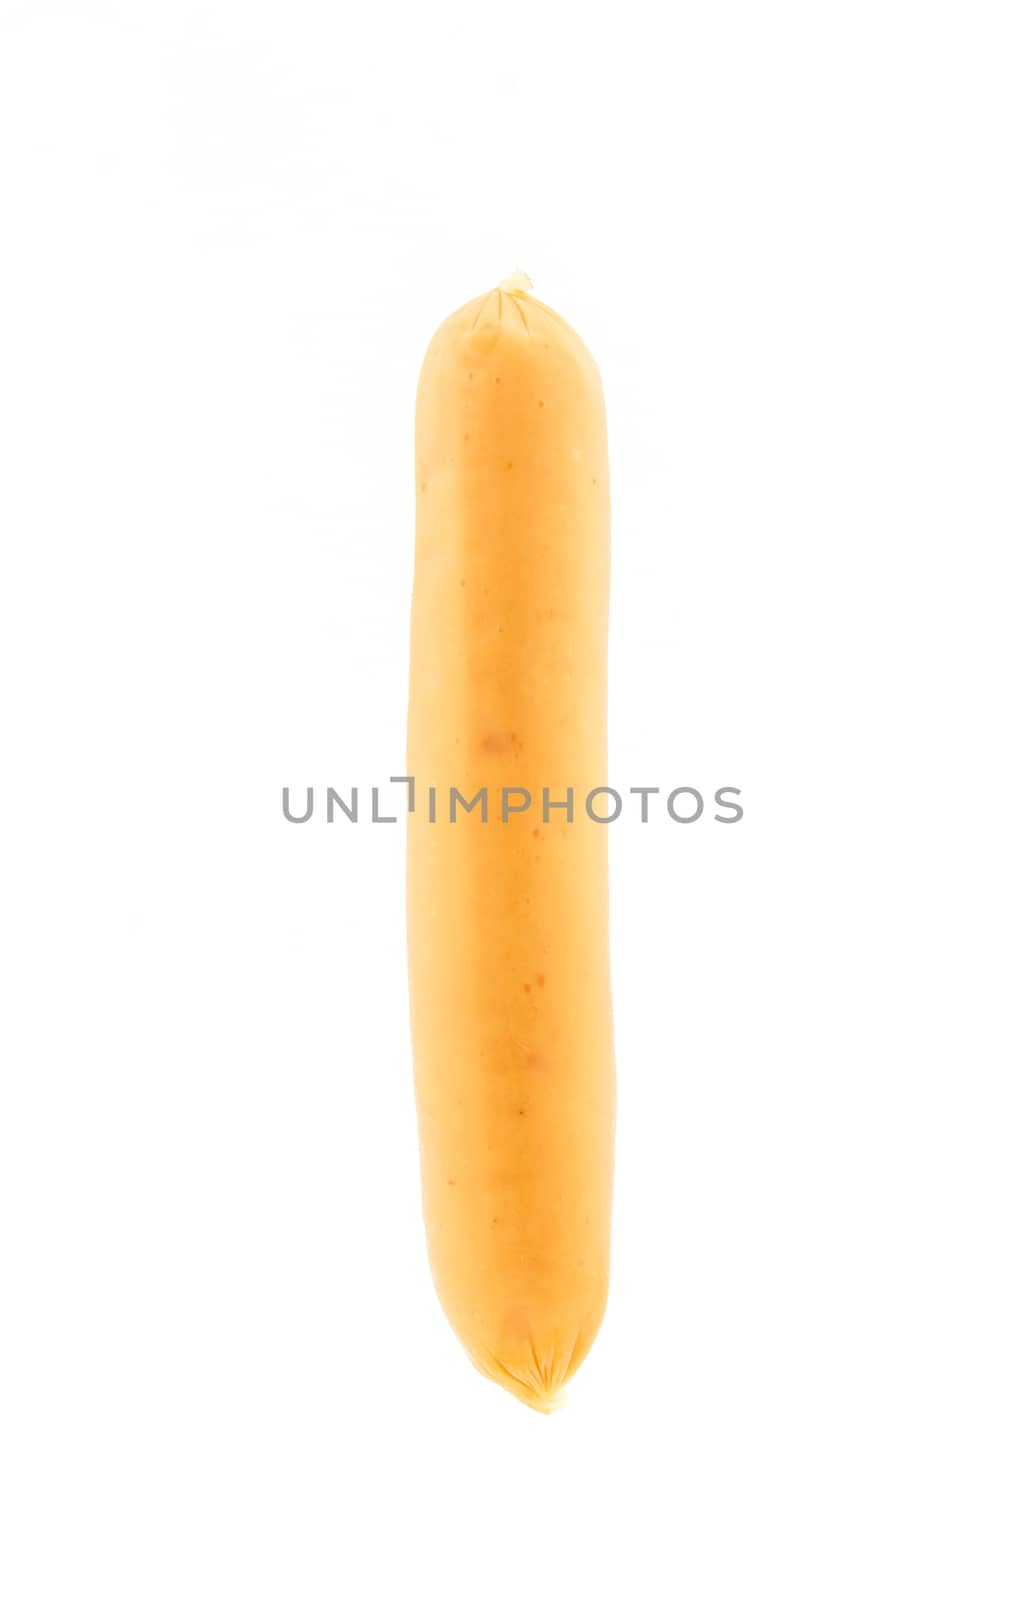 Sausage isolated on white background